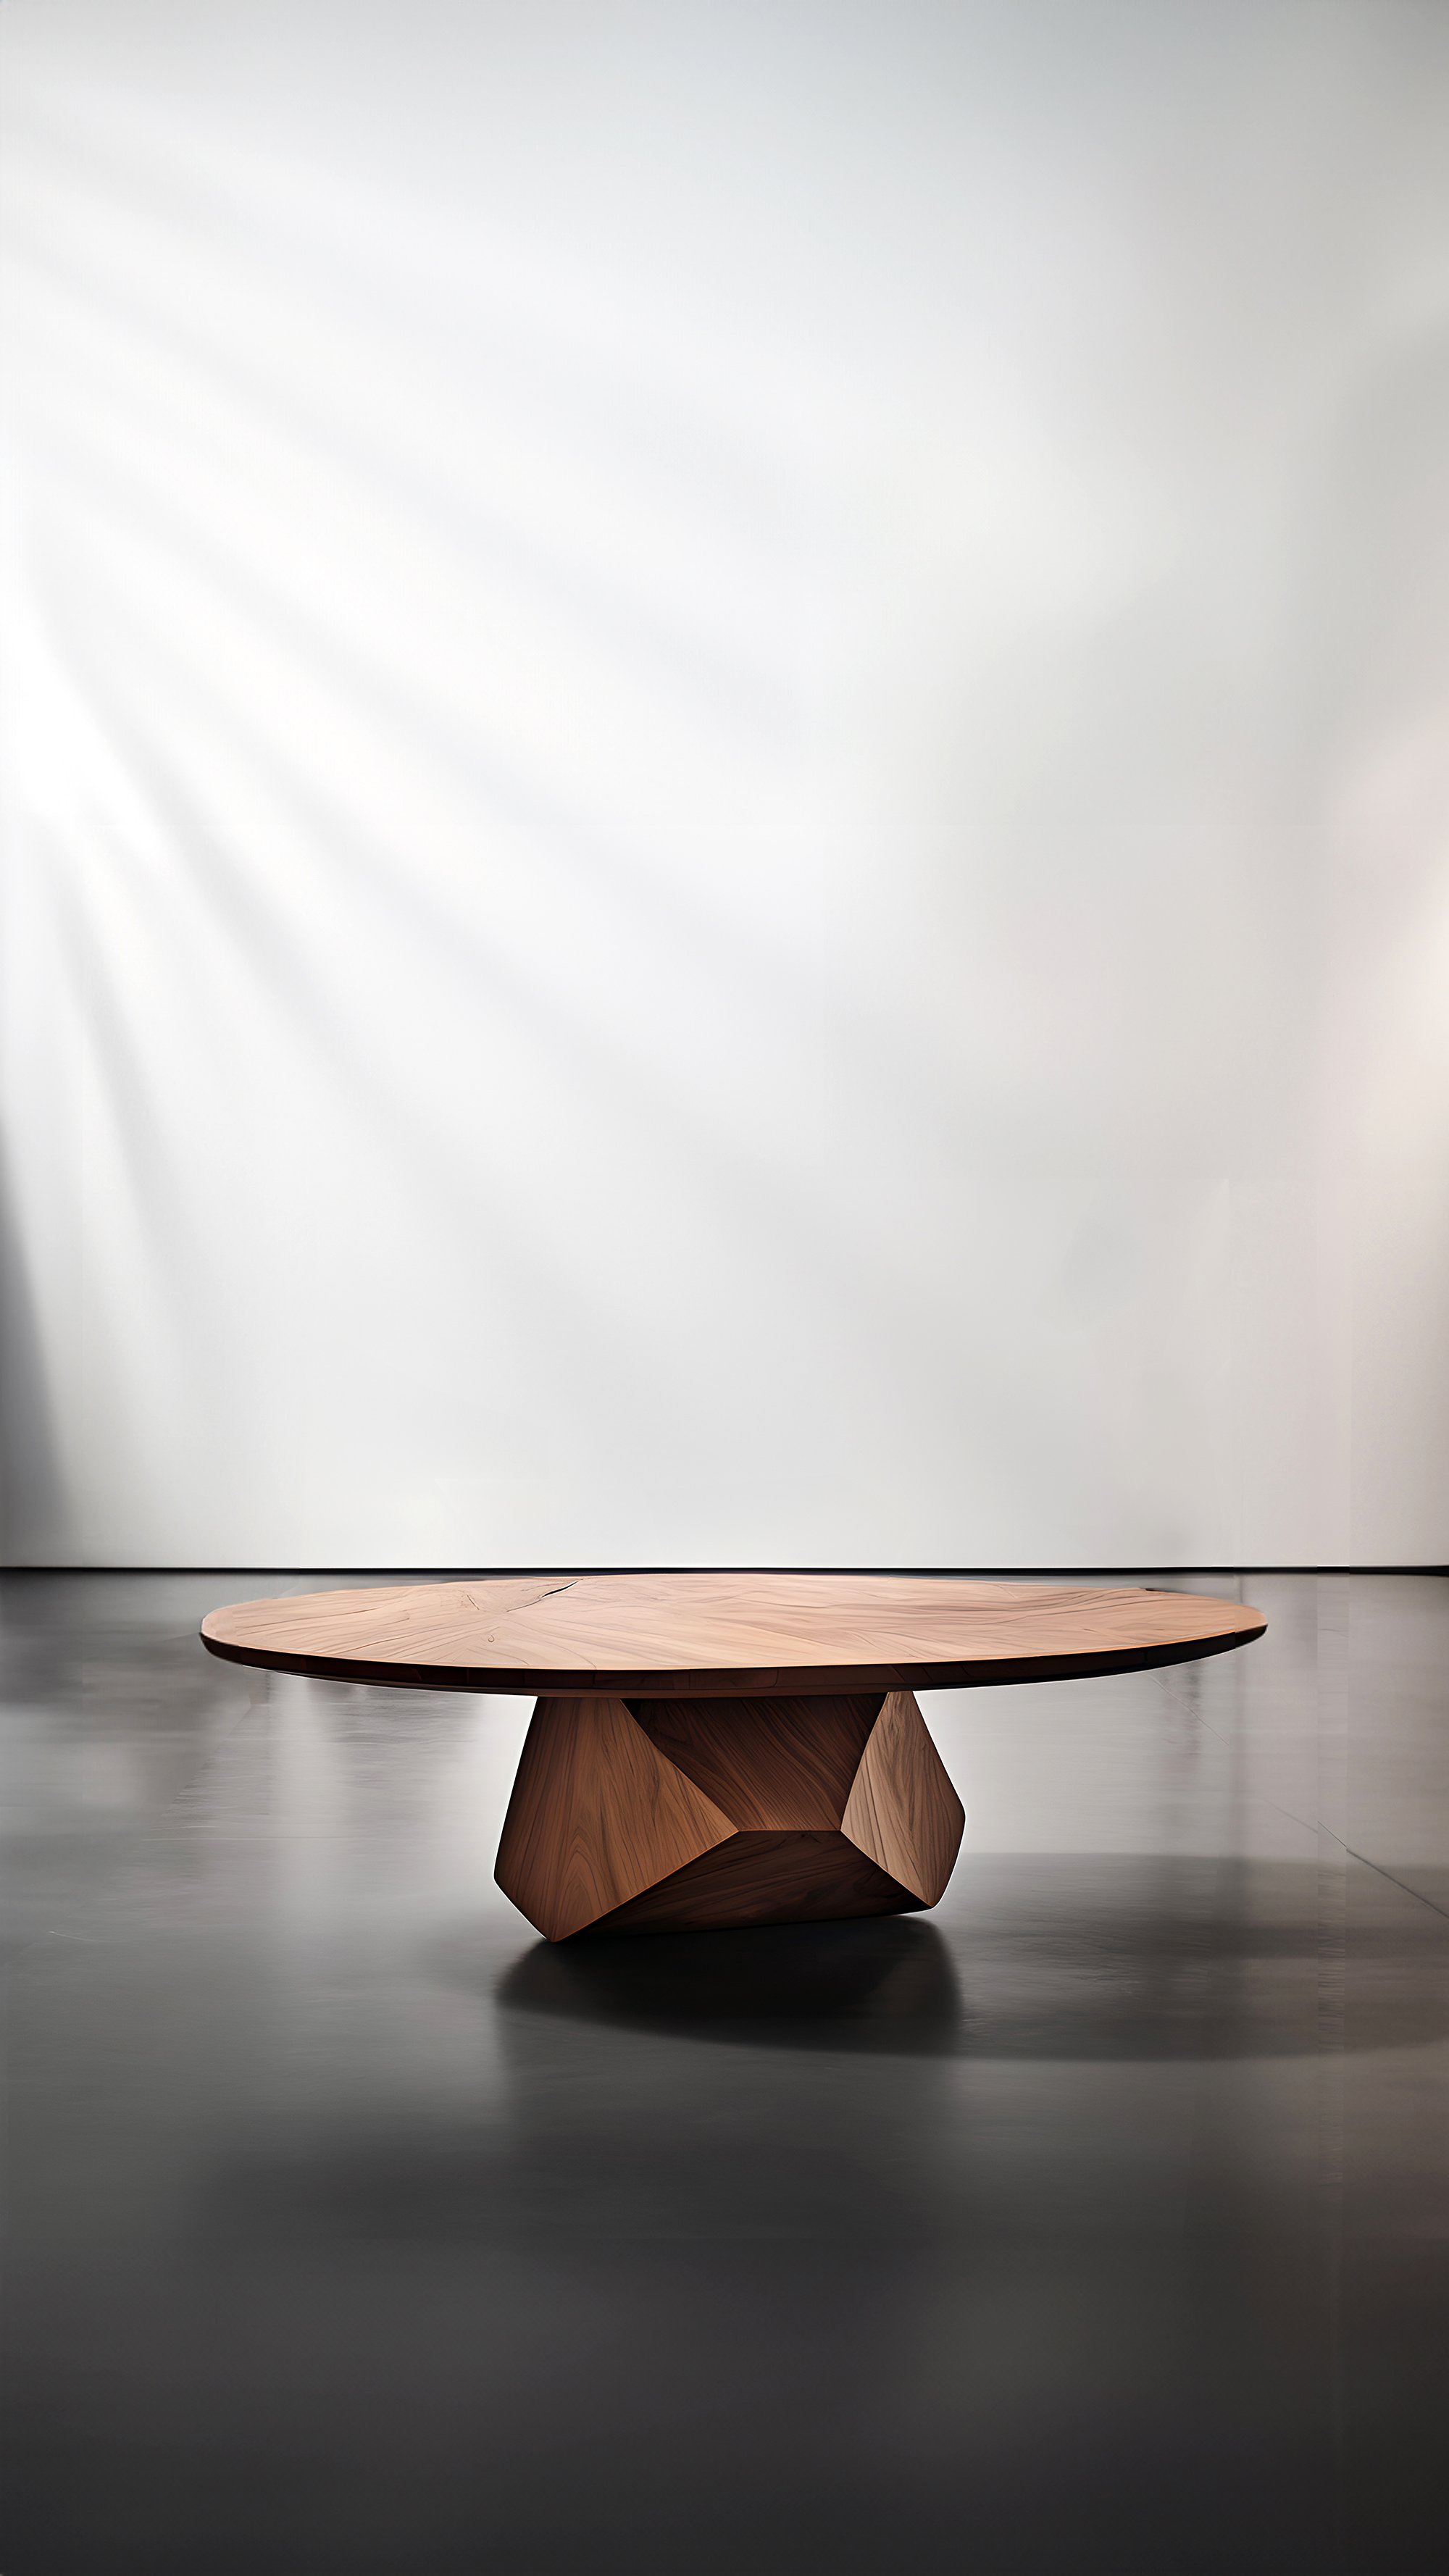 Sculptural Coffee Table Made of Solid Wood, Center Table Solace S39 by Joel Escalona — 6.jpg